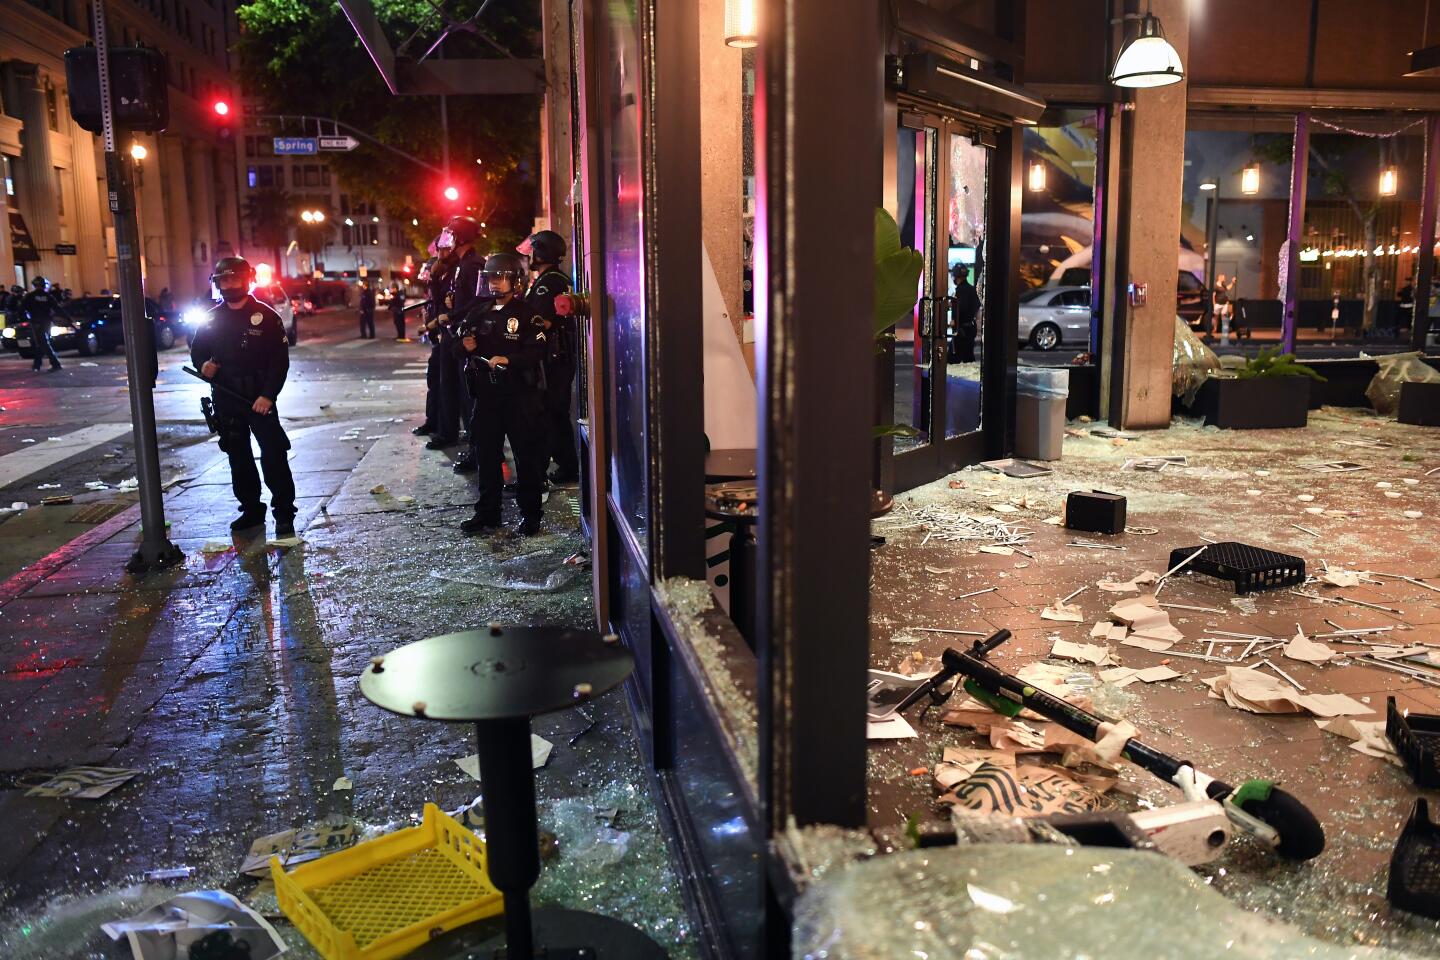 Police officers stand outside a damaged business in downtown Los Angeles